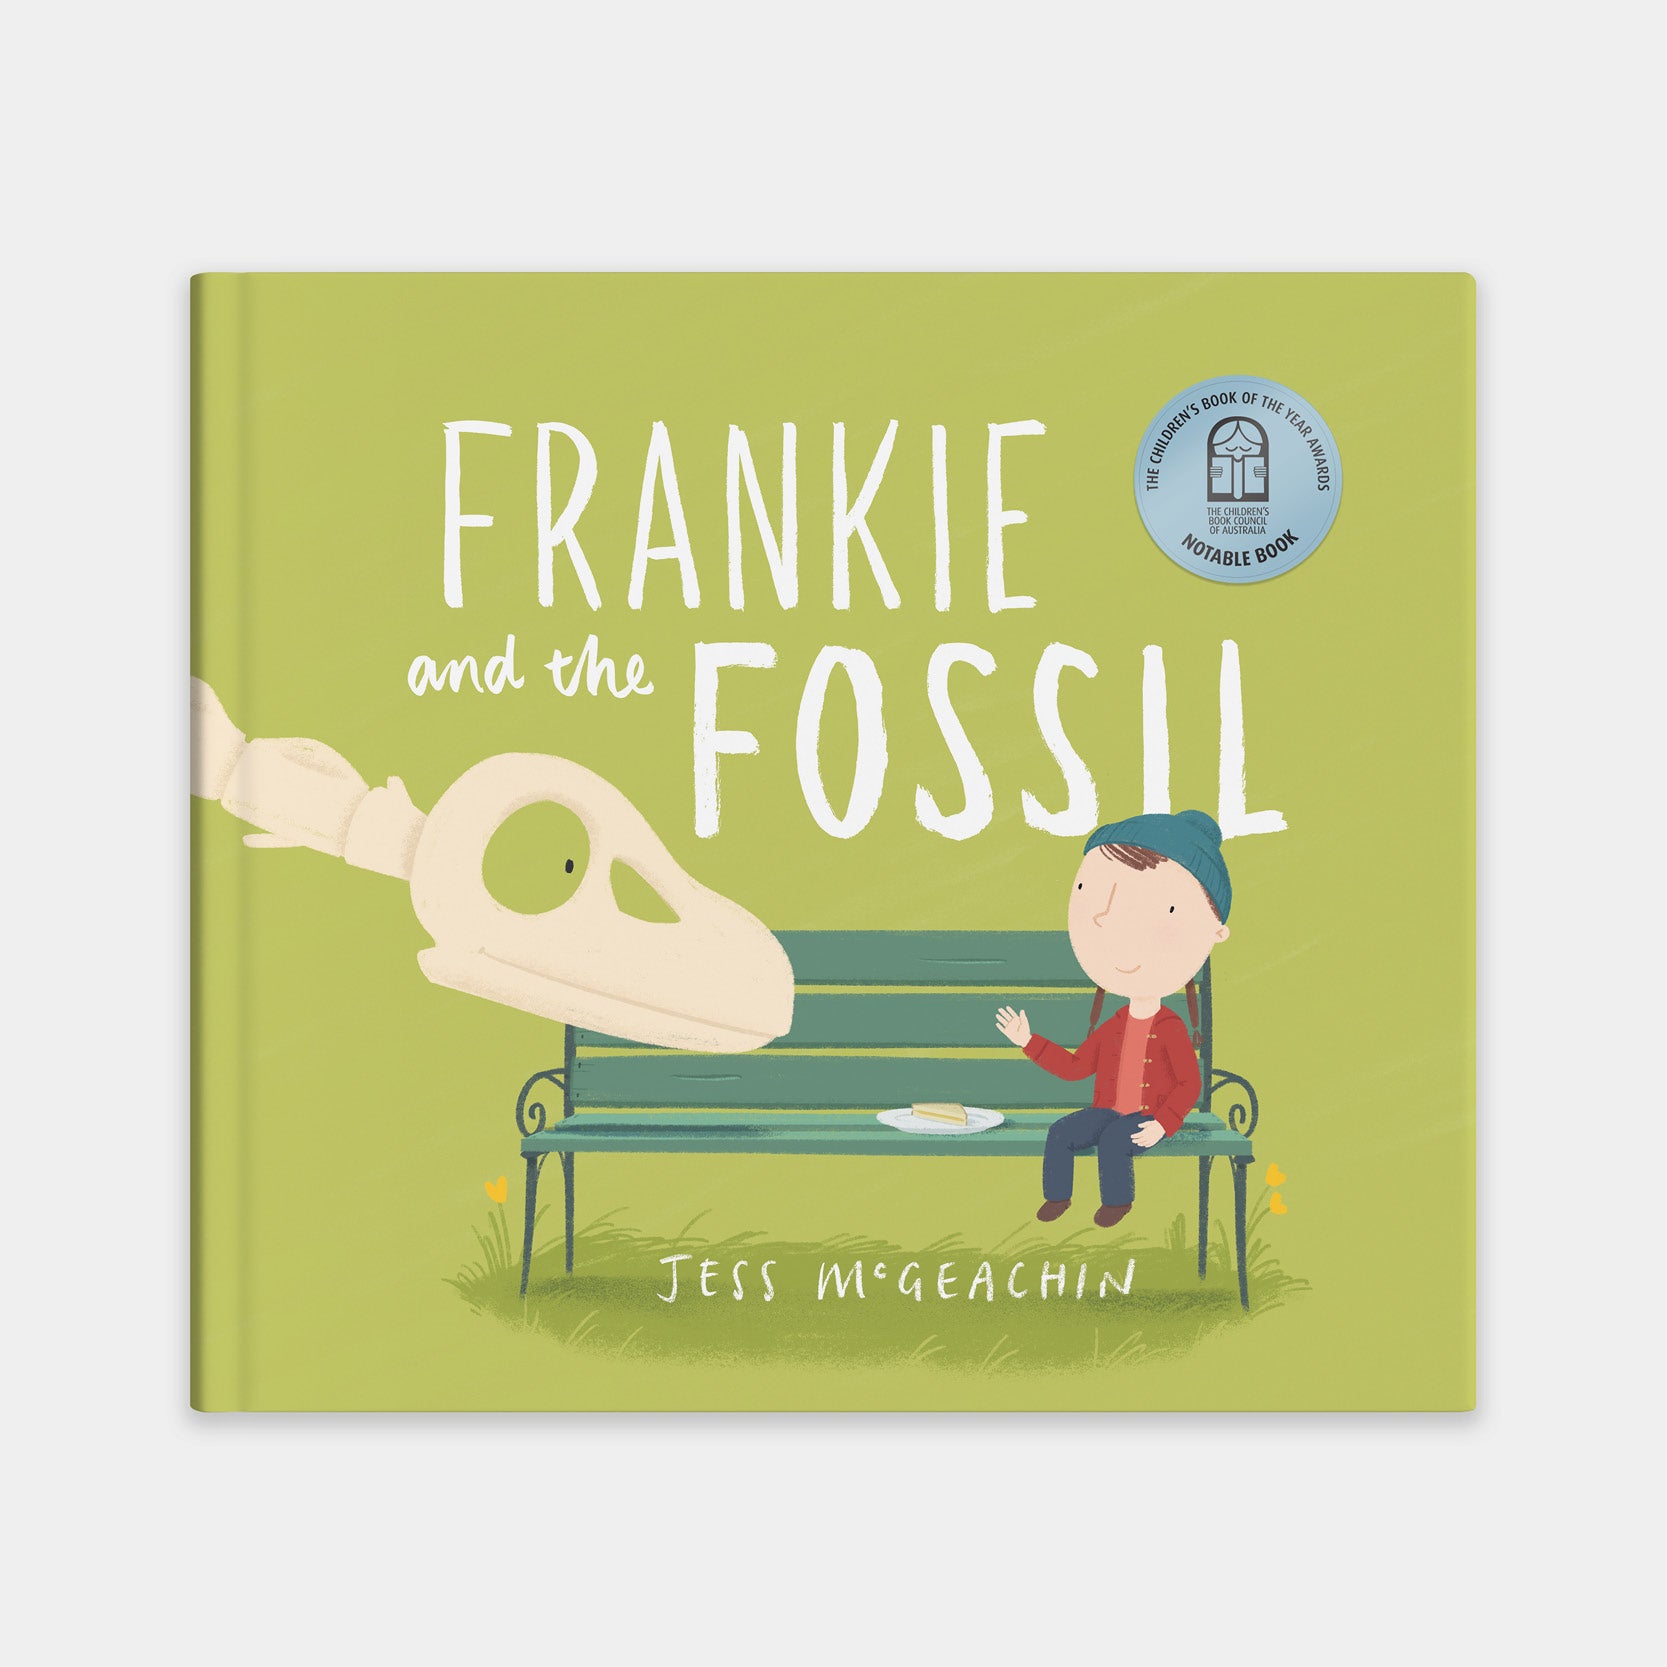 Frankie and the Fossil